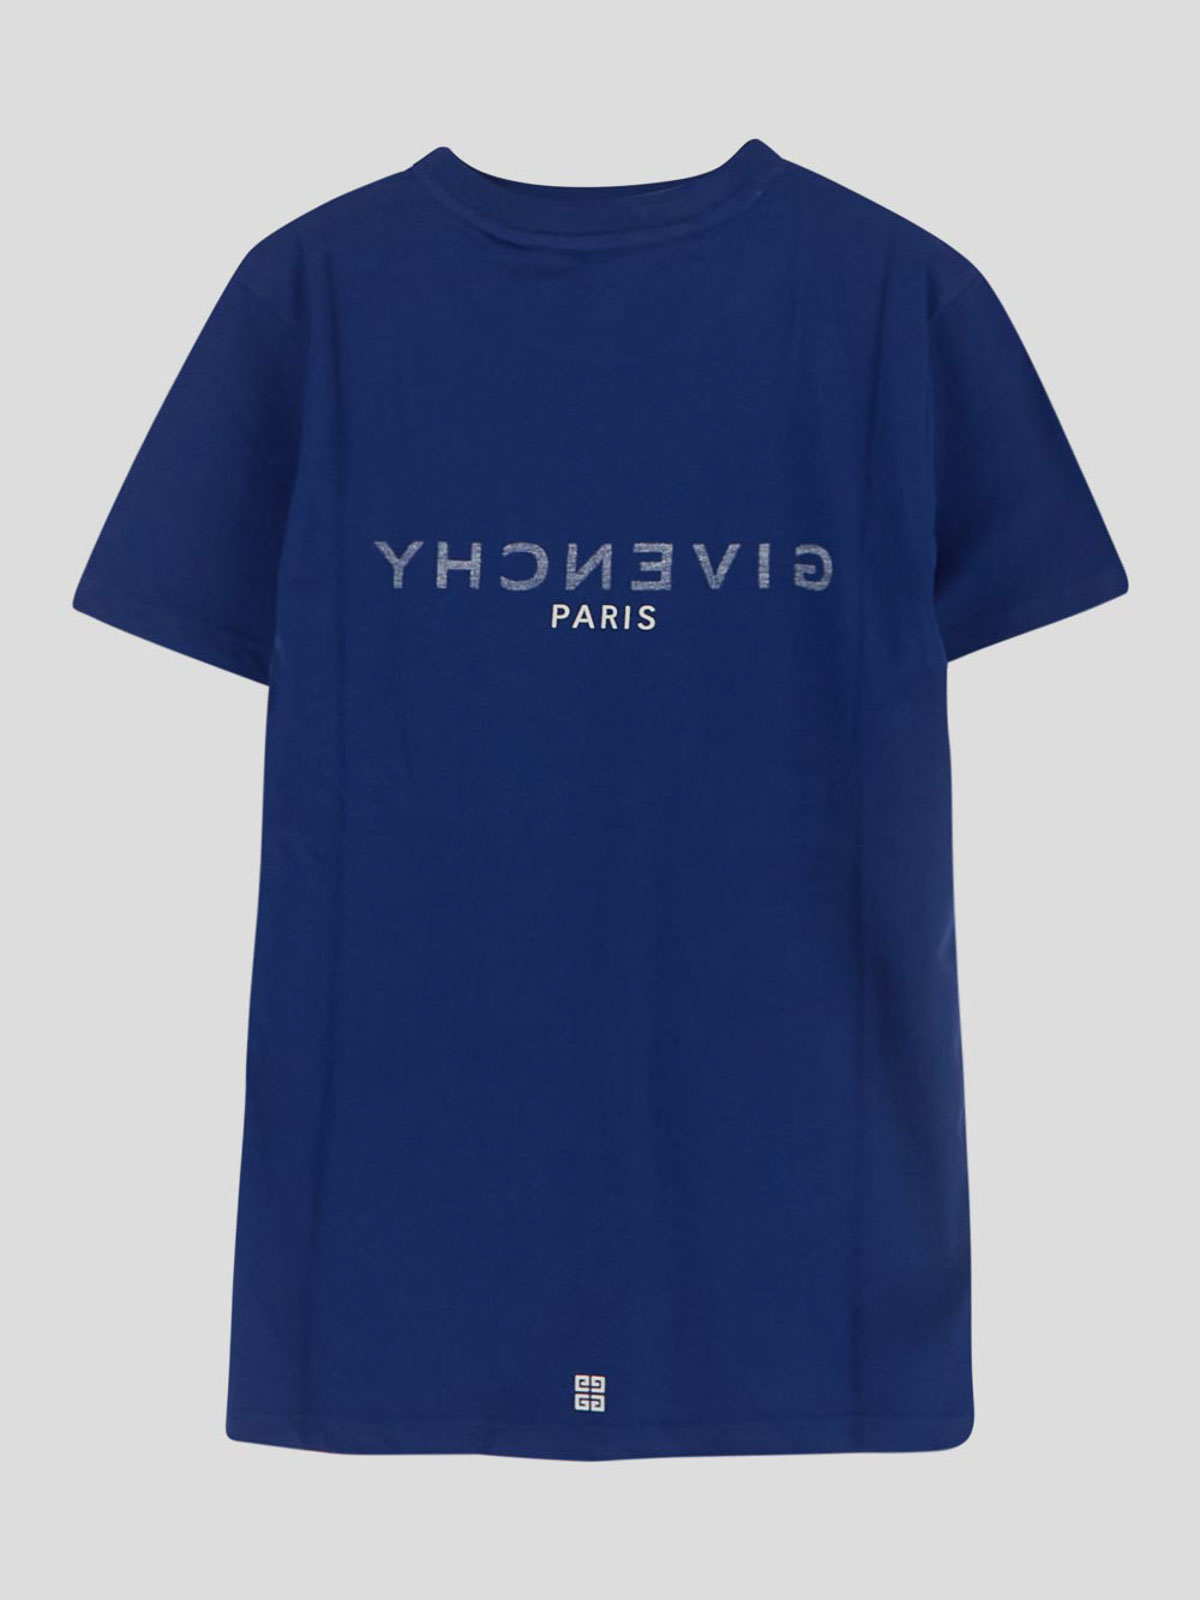 Tシャツ Givenchy - Tシャツ - ブルー - H25446NAVY | THEBS